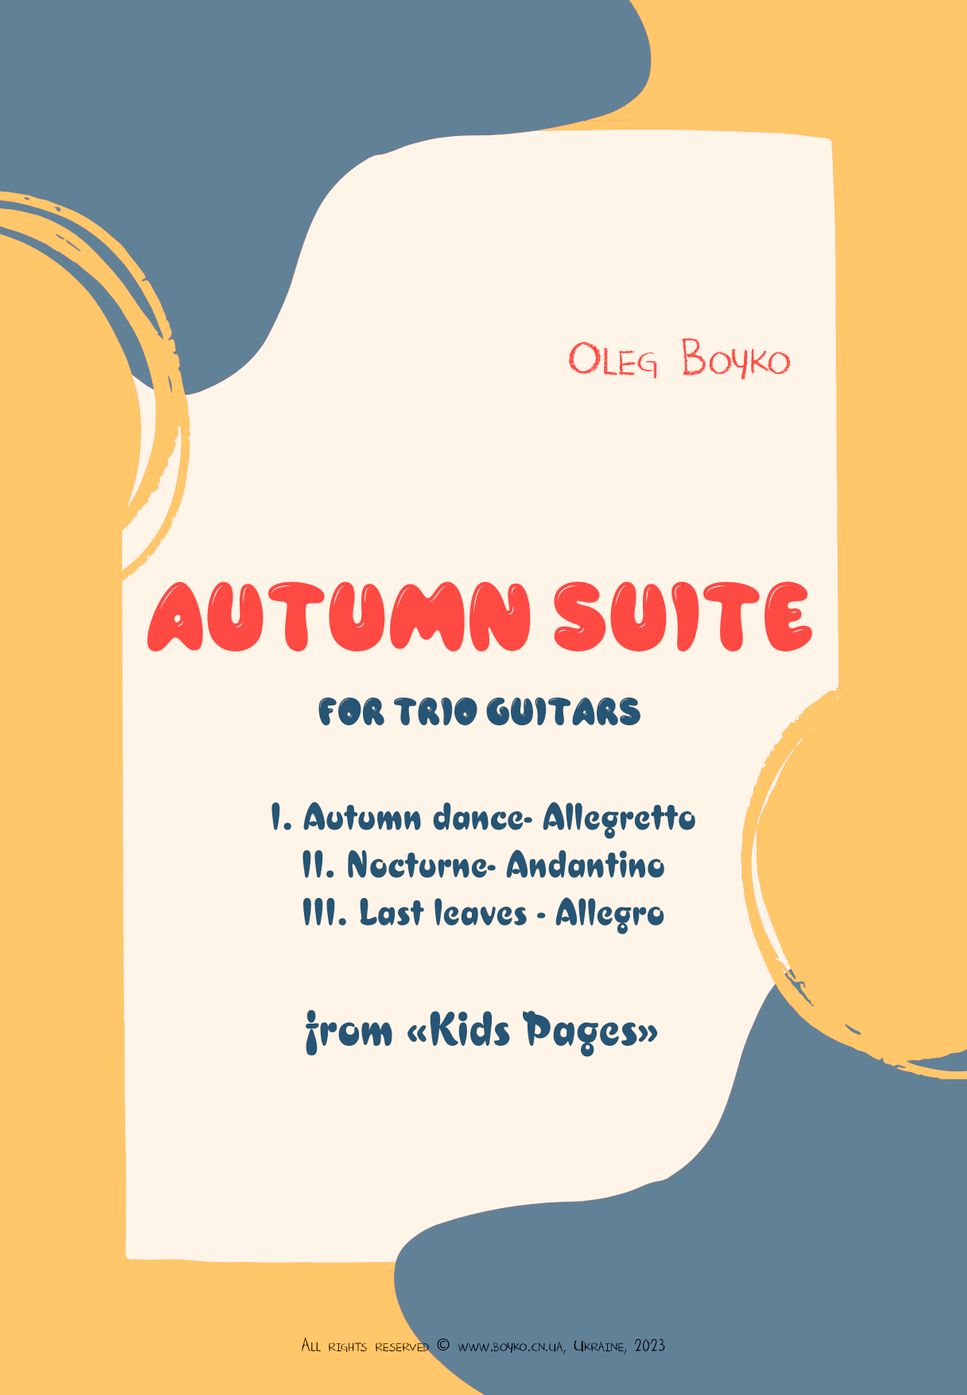 Autumn suite for trio guitars from "Kids Pages" by Oleg Boyko